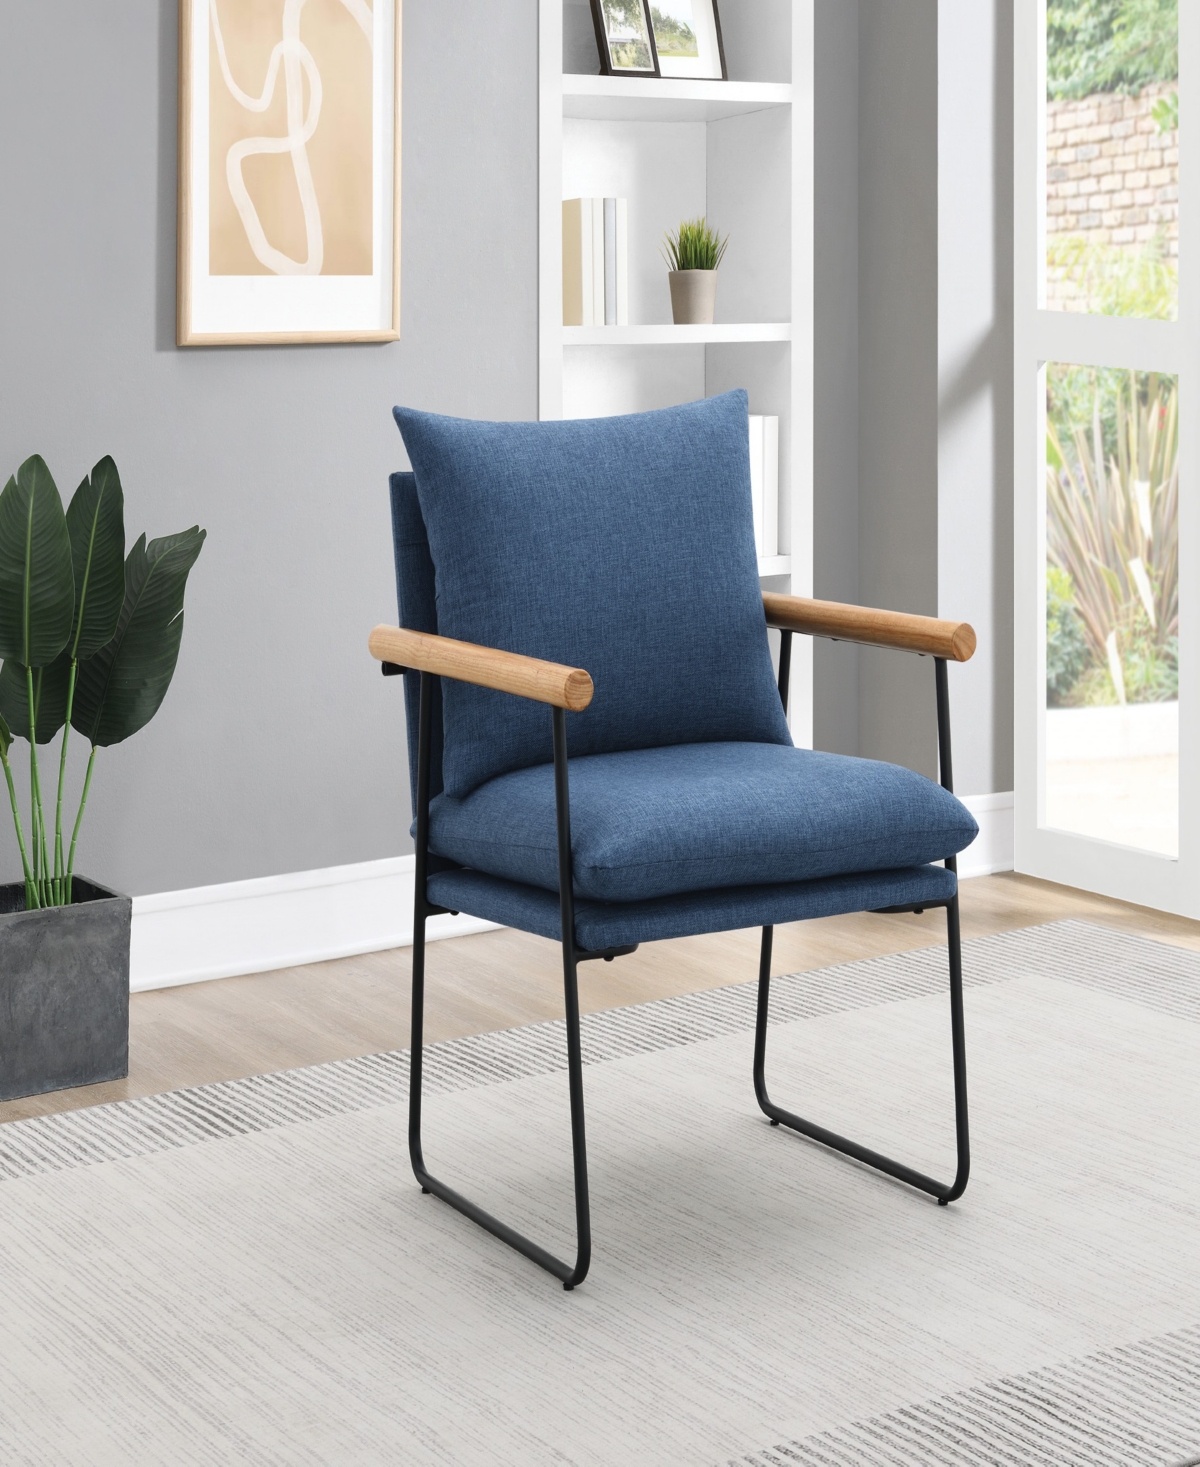 Shop Osp Home Furnishings Office Star Dutton Armchair In Navy Fabric With Natural Arms And Black Sled Base